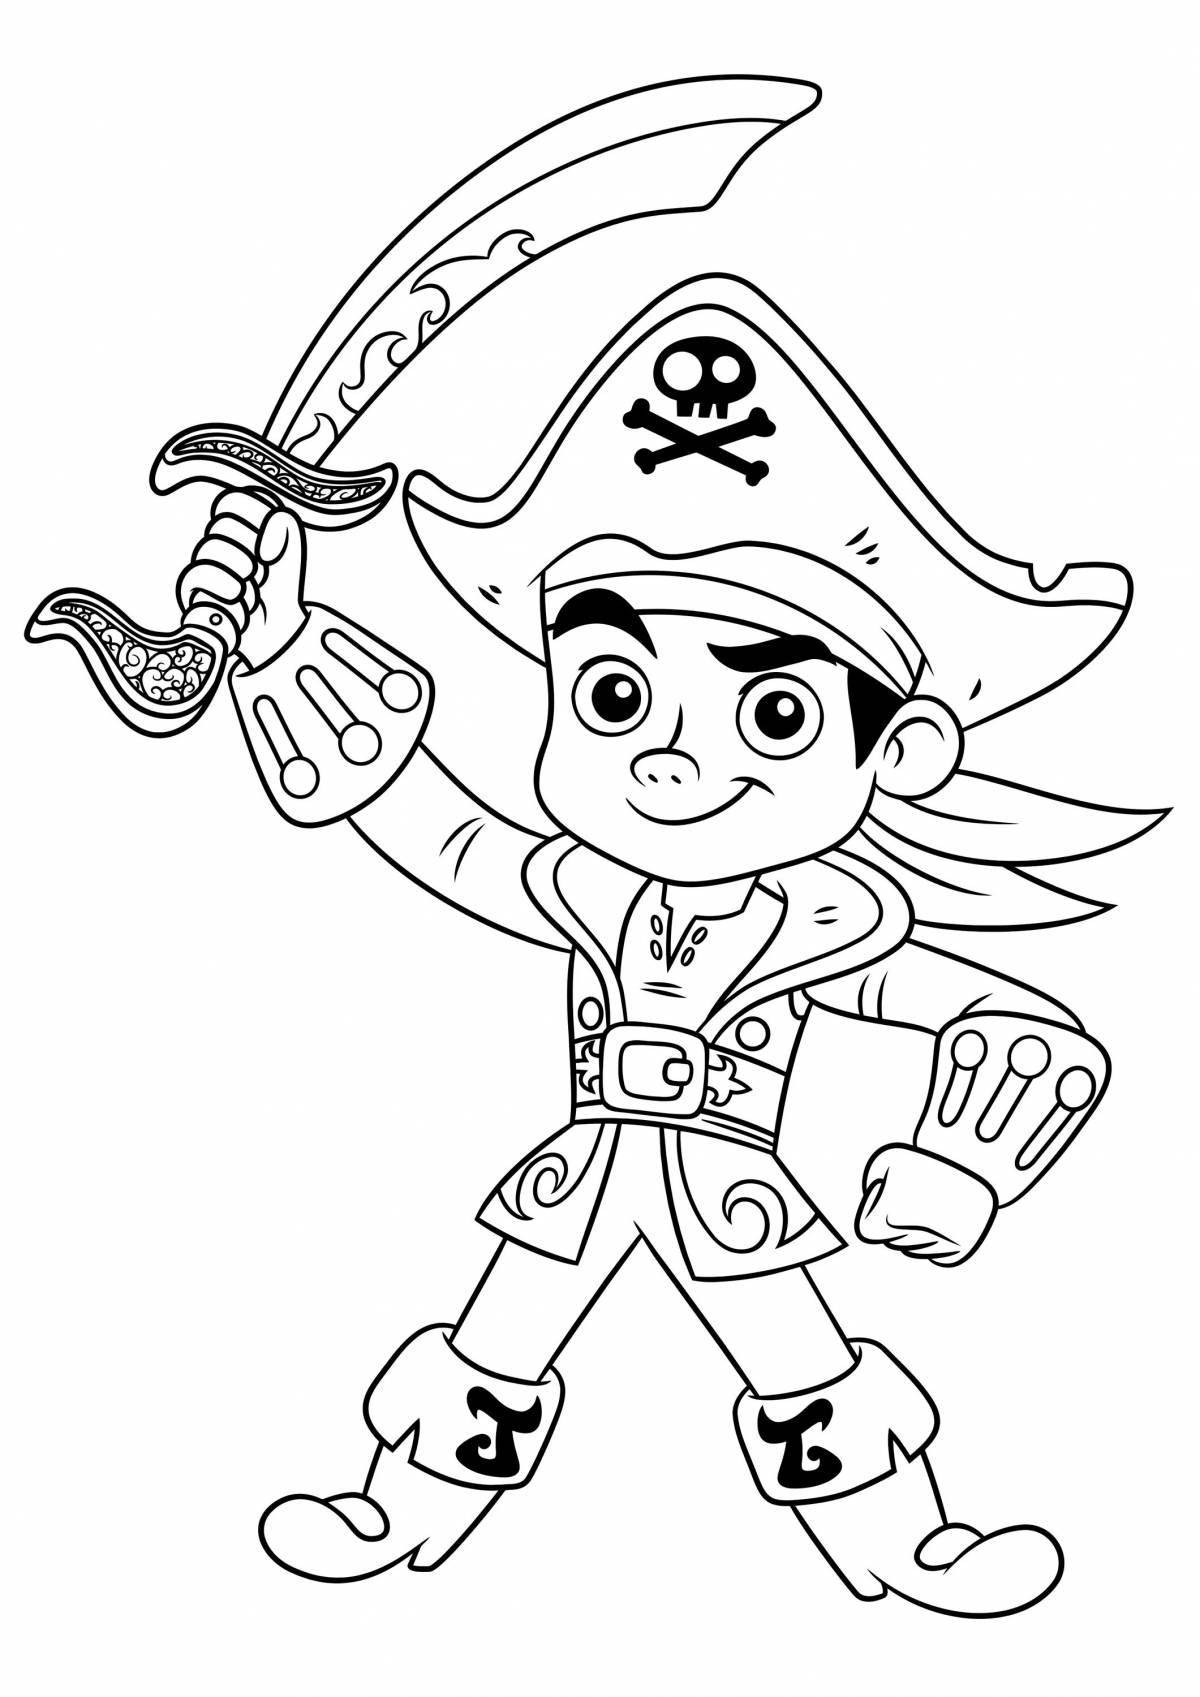 Coloring page energetic pirate